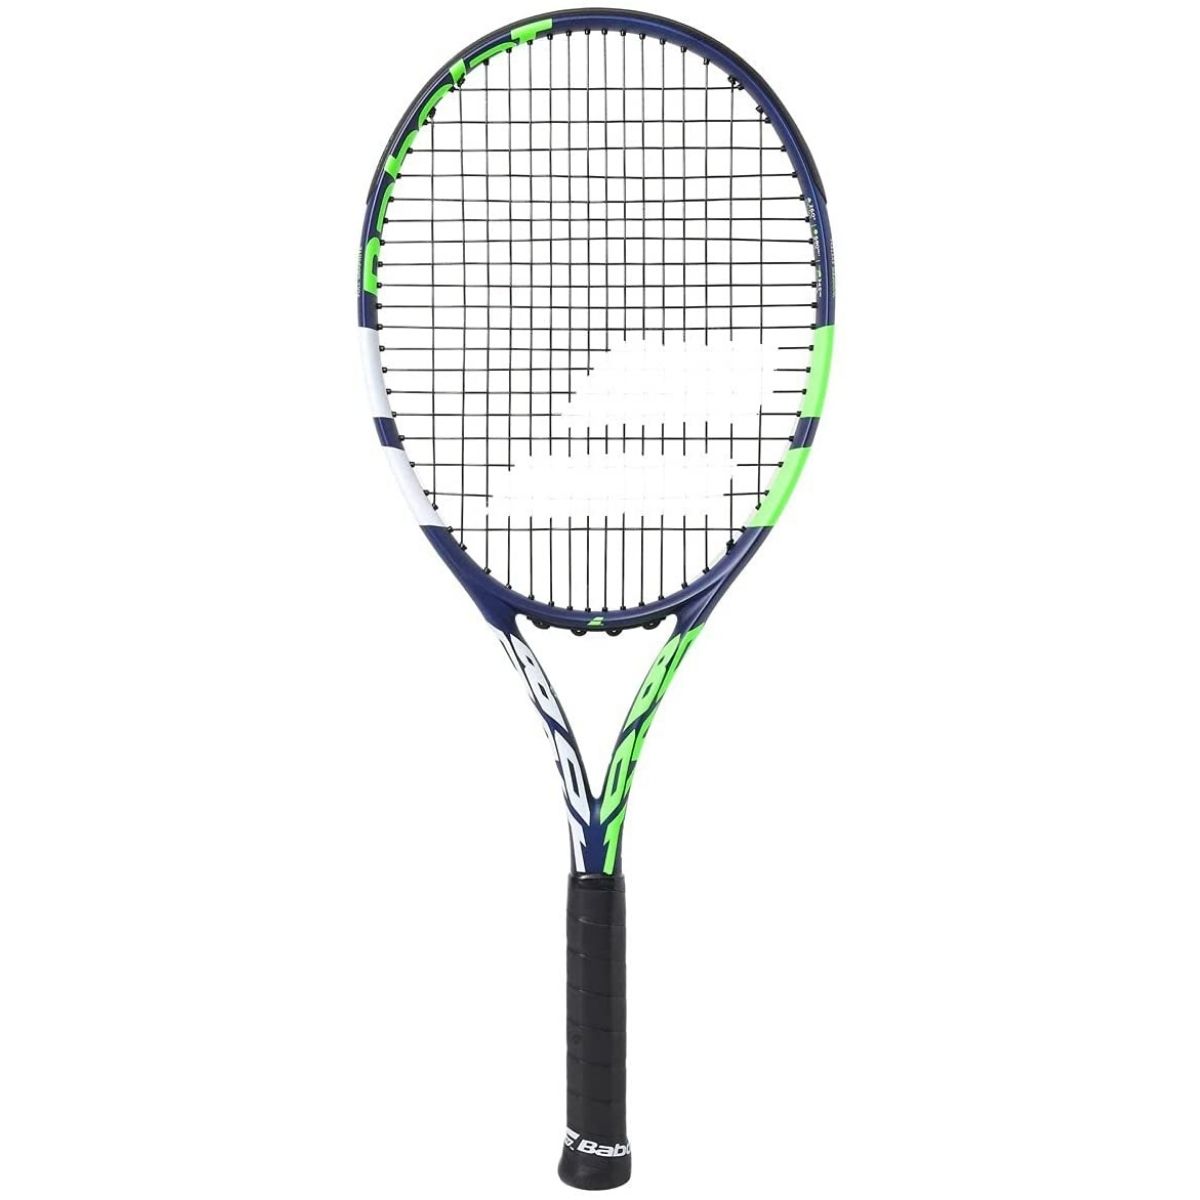 The Best Tennis Rackets for Beginners Options: Babolat Boost Drive